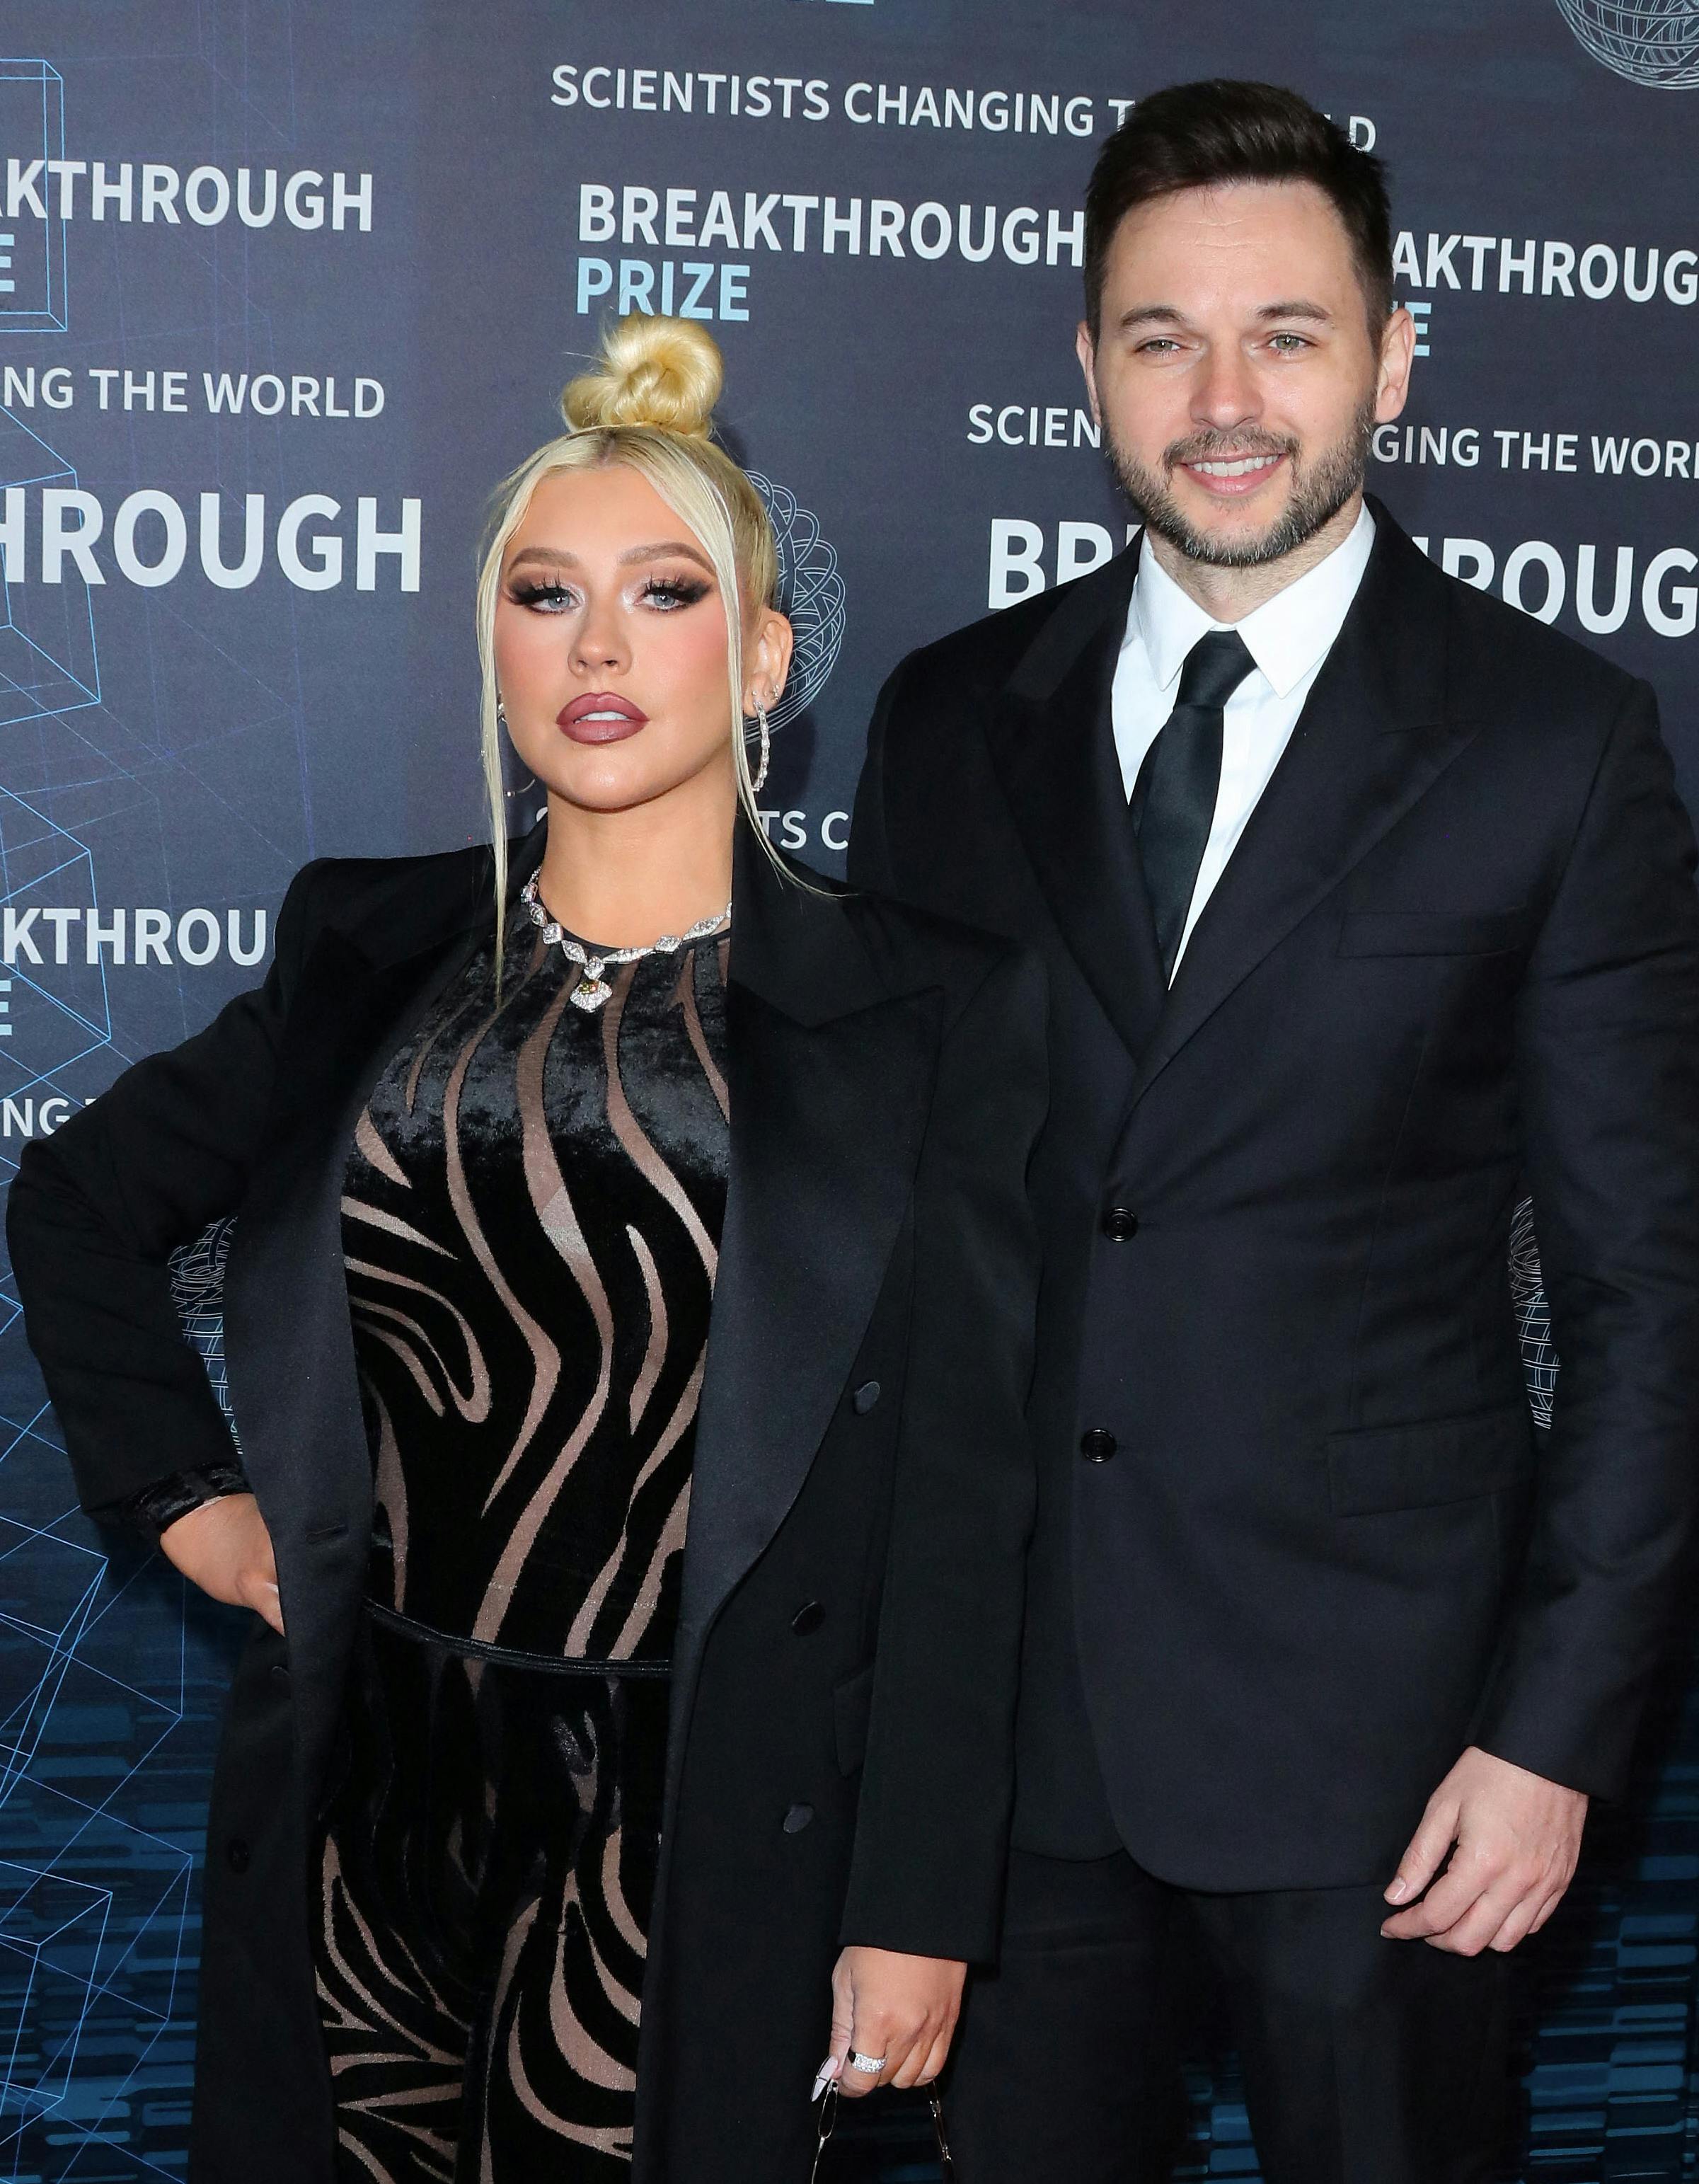 US singer-songwriter Christina Aguilera and partner Matthew Rutler arrive for the ninth Breakthrough Prize awards ceremony at the Academy Museum of Motion Pictures in Los Angeles, April 15, 2023. Juan Pablo Rico / AFP